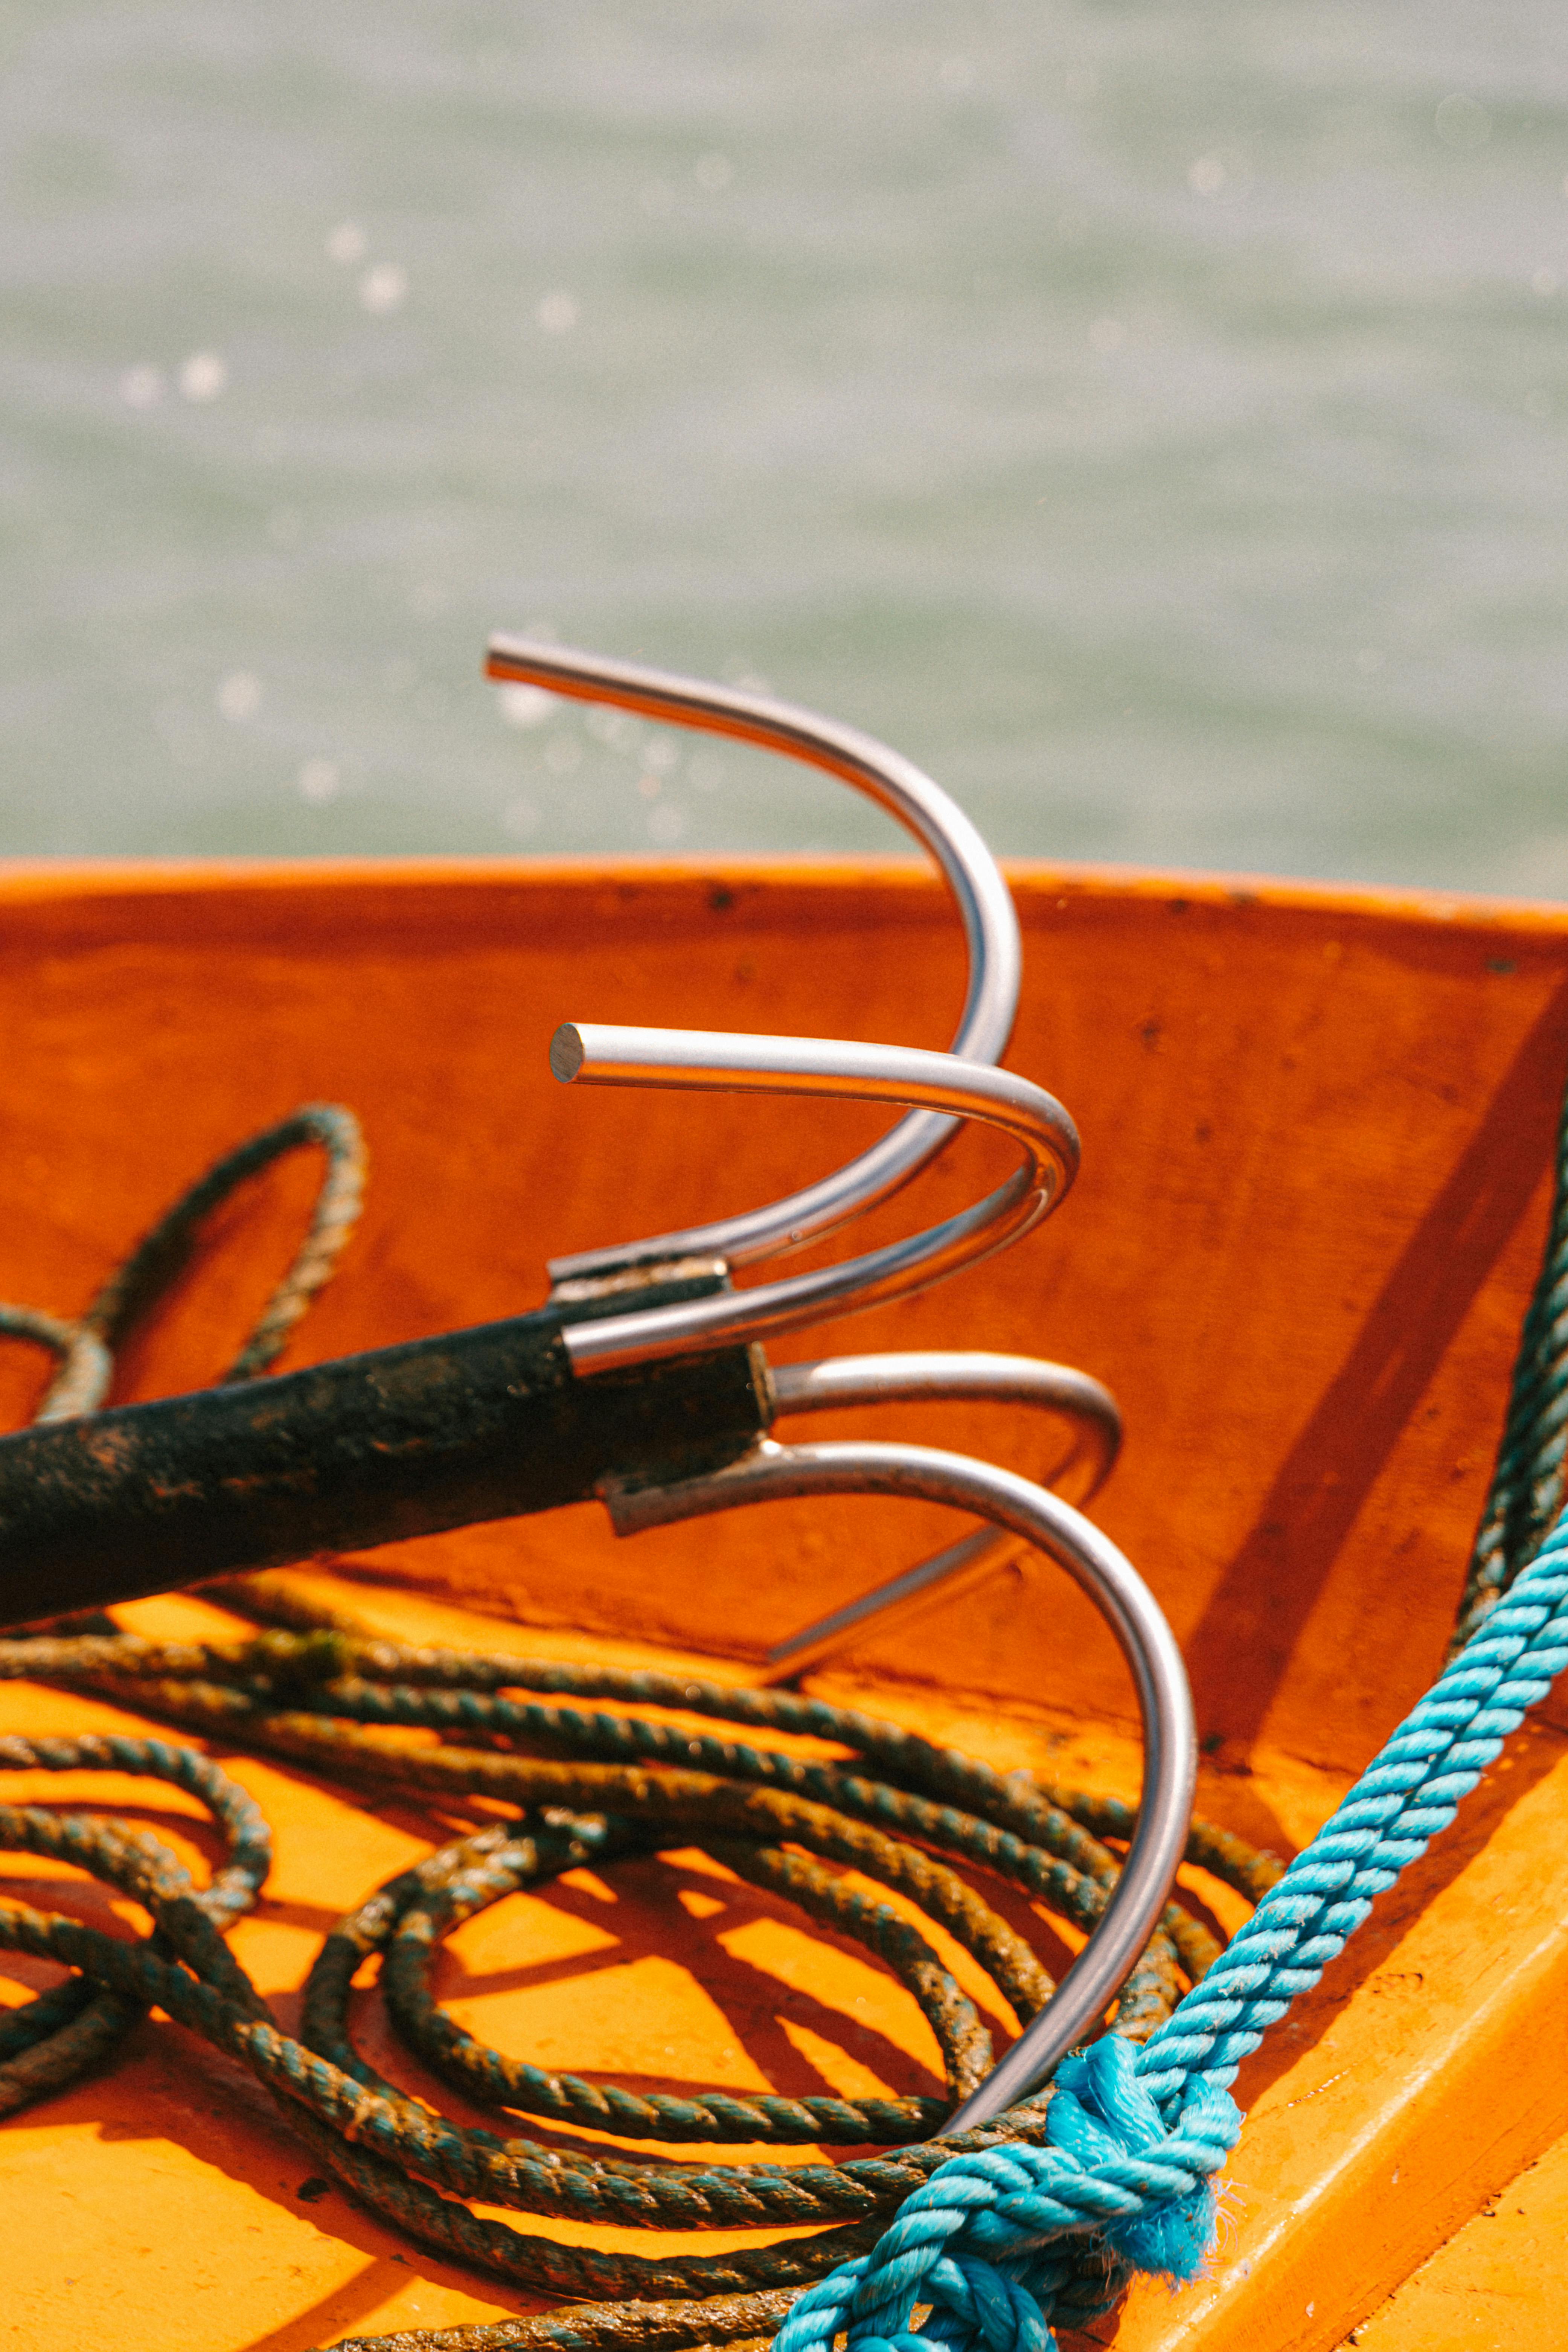 Metal Hook with Rope on Boat · Free Stock Photo